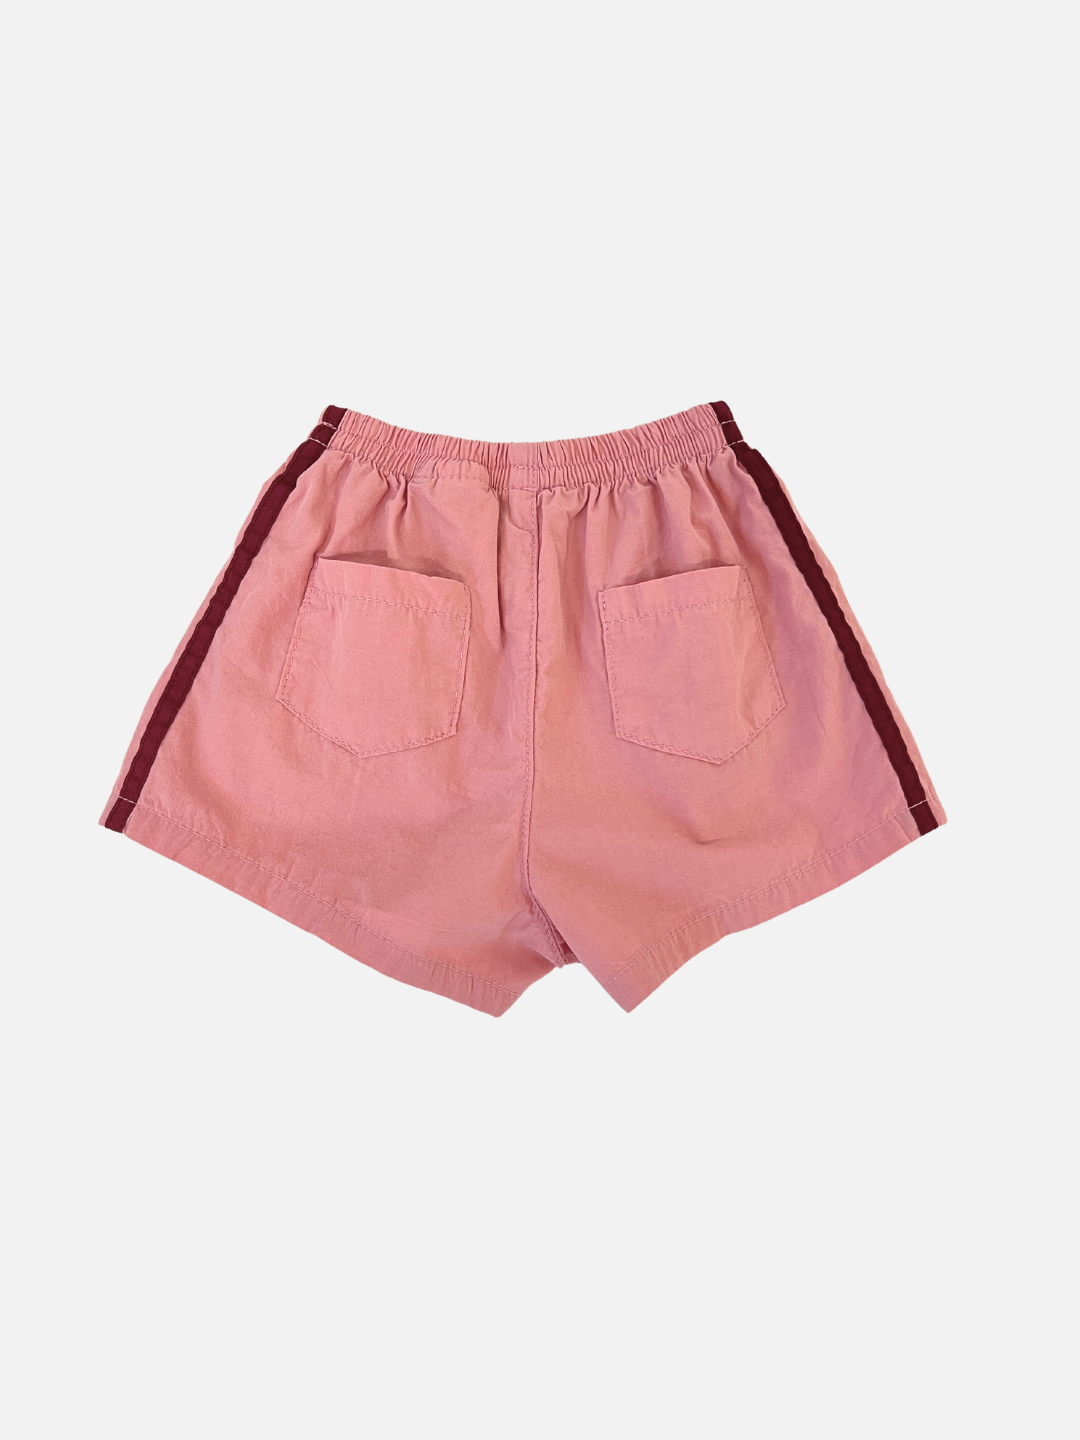 Back view of the kids' dusty pink shorts with burgundy stripes on the sides and two back pockets. 